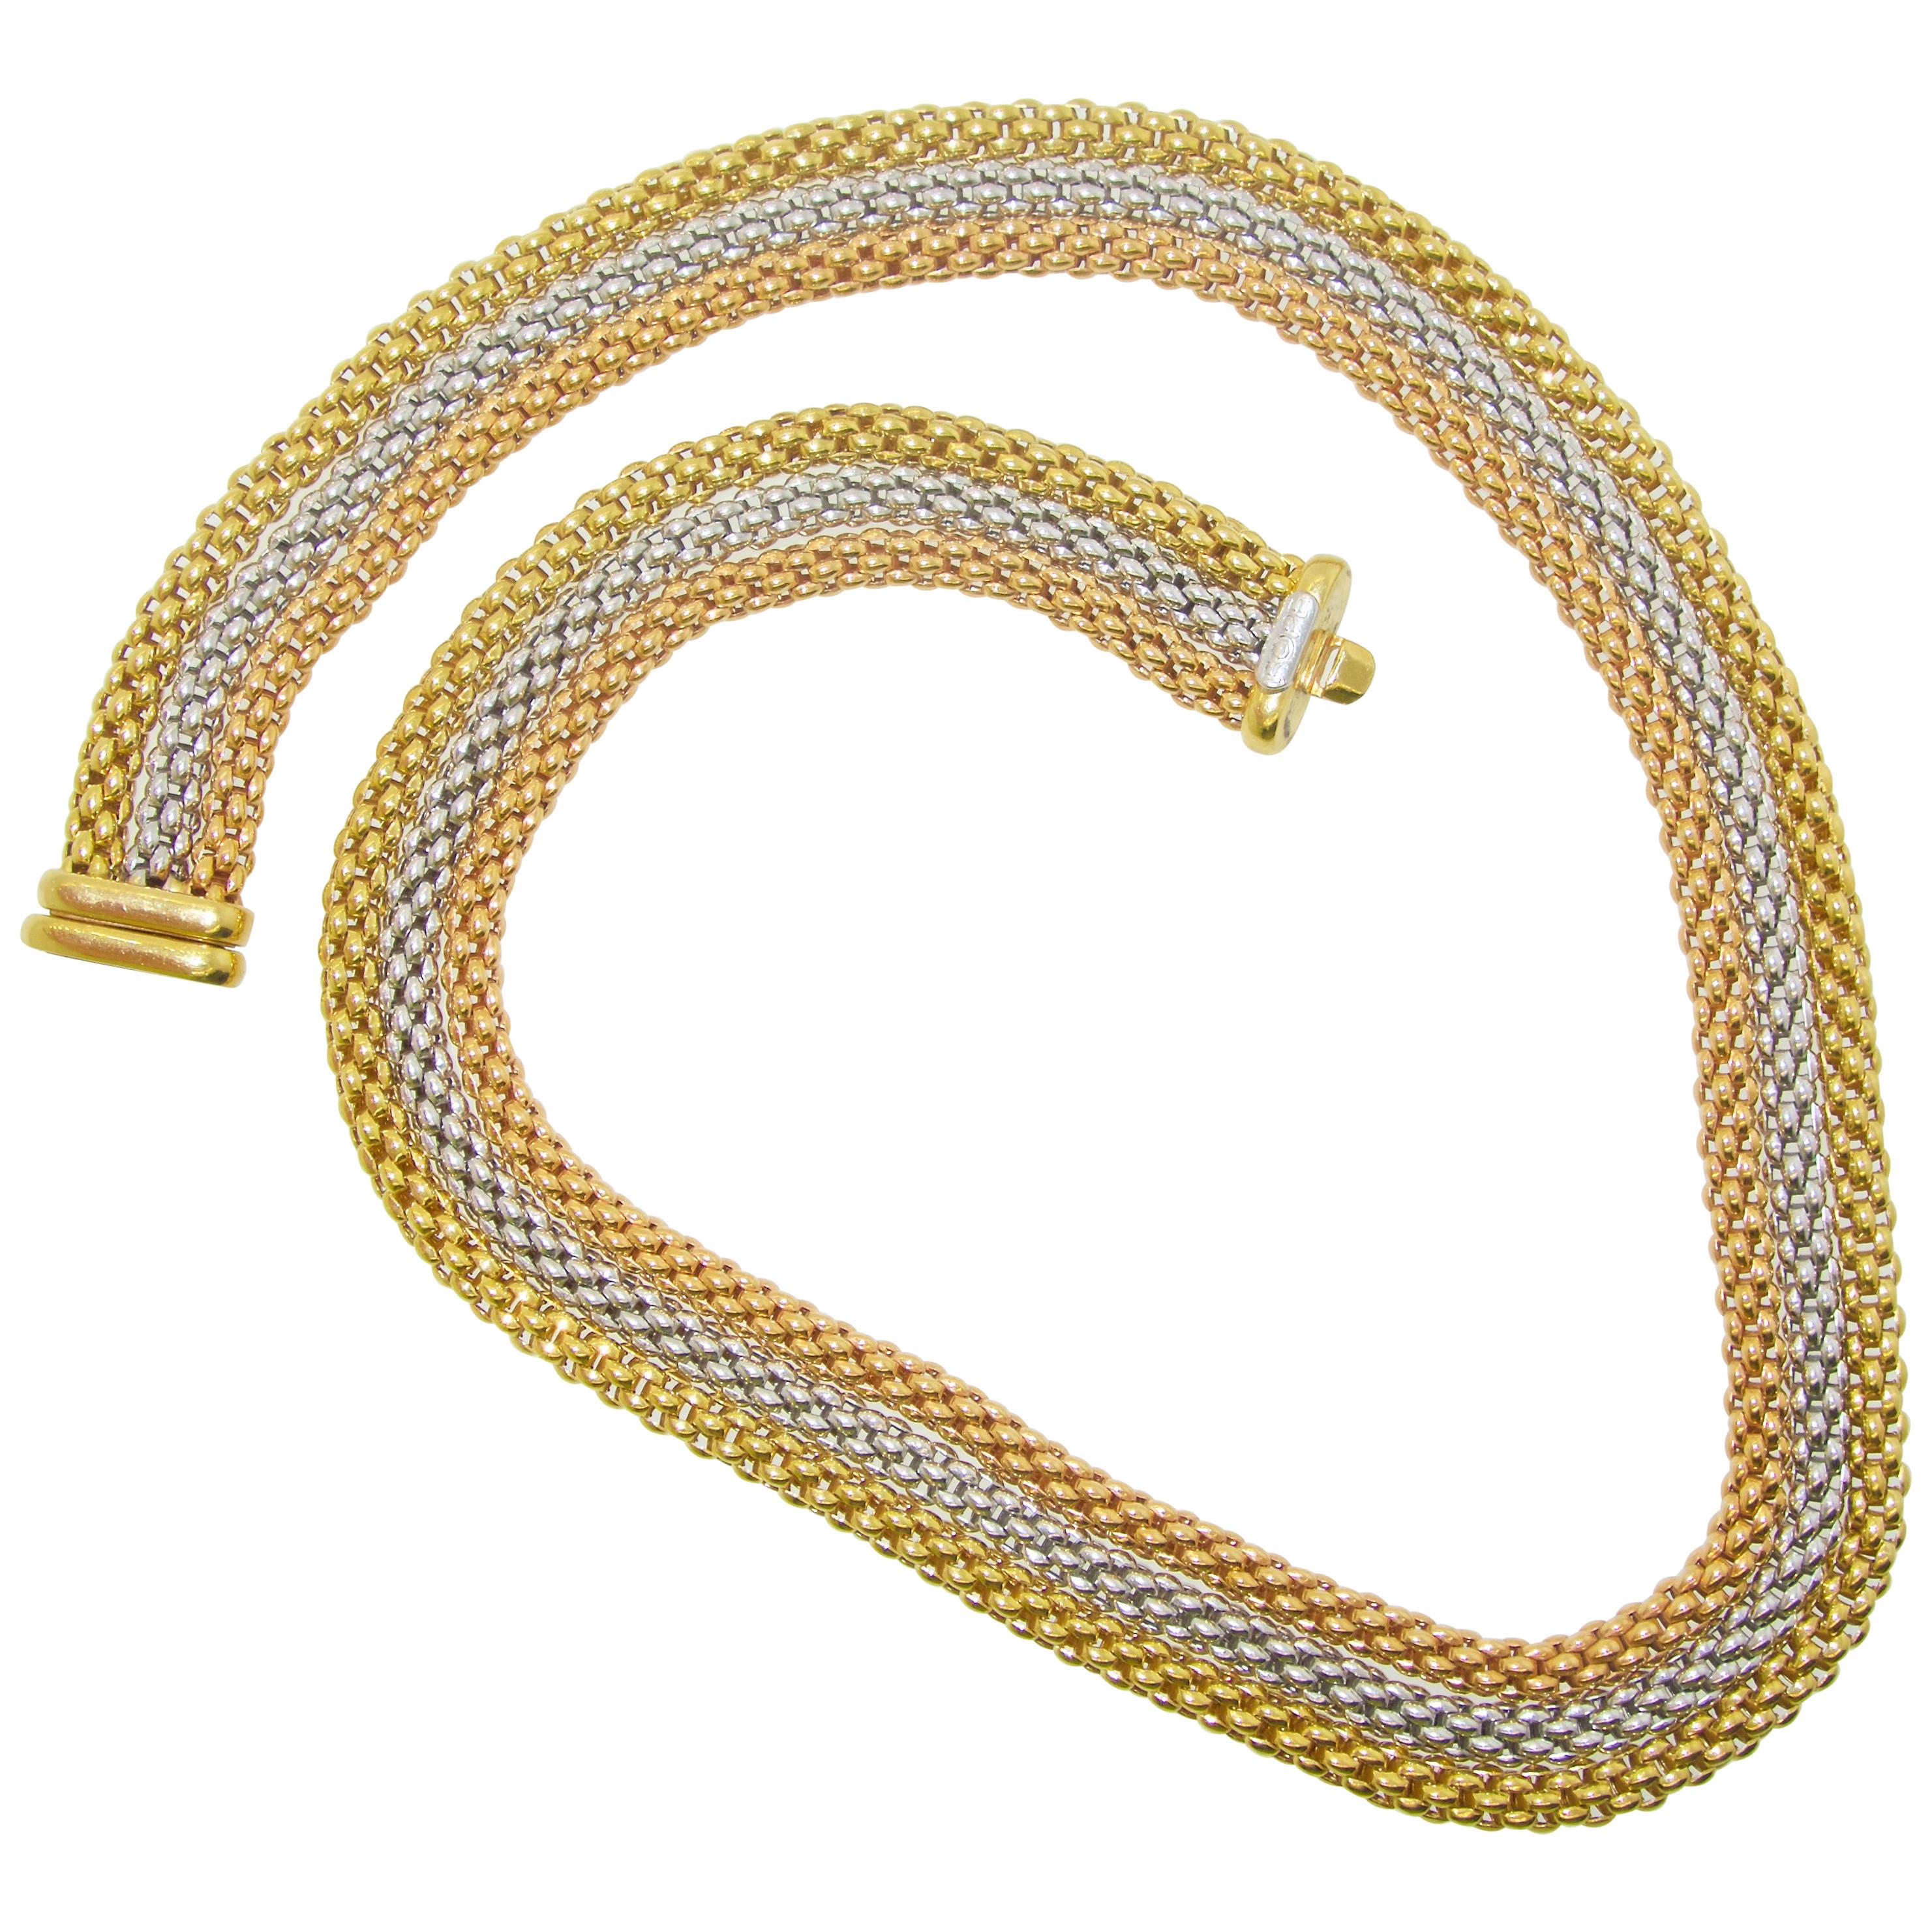 18 Karat Handwoven Gold Necklace by Fope